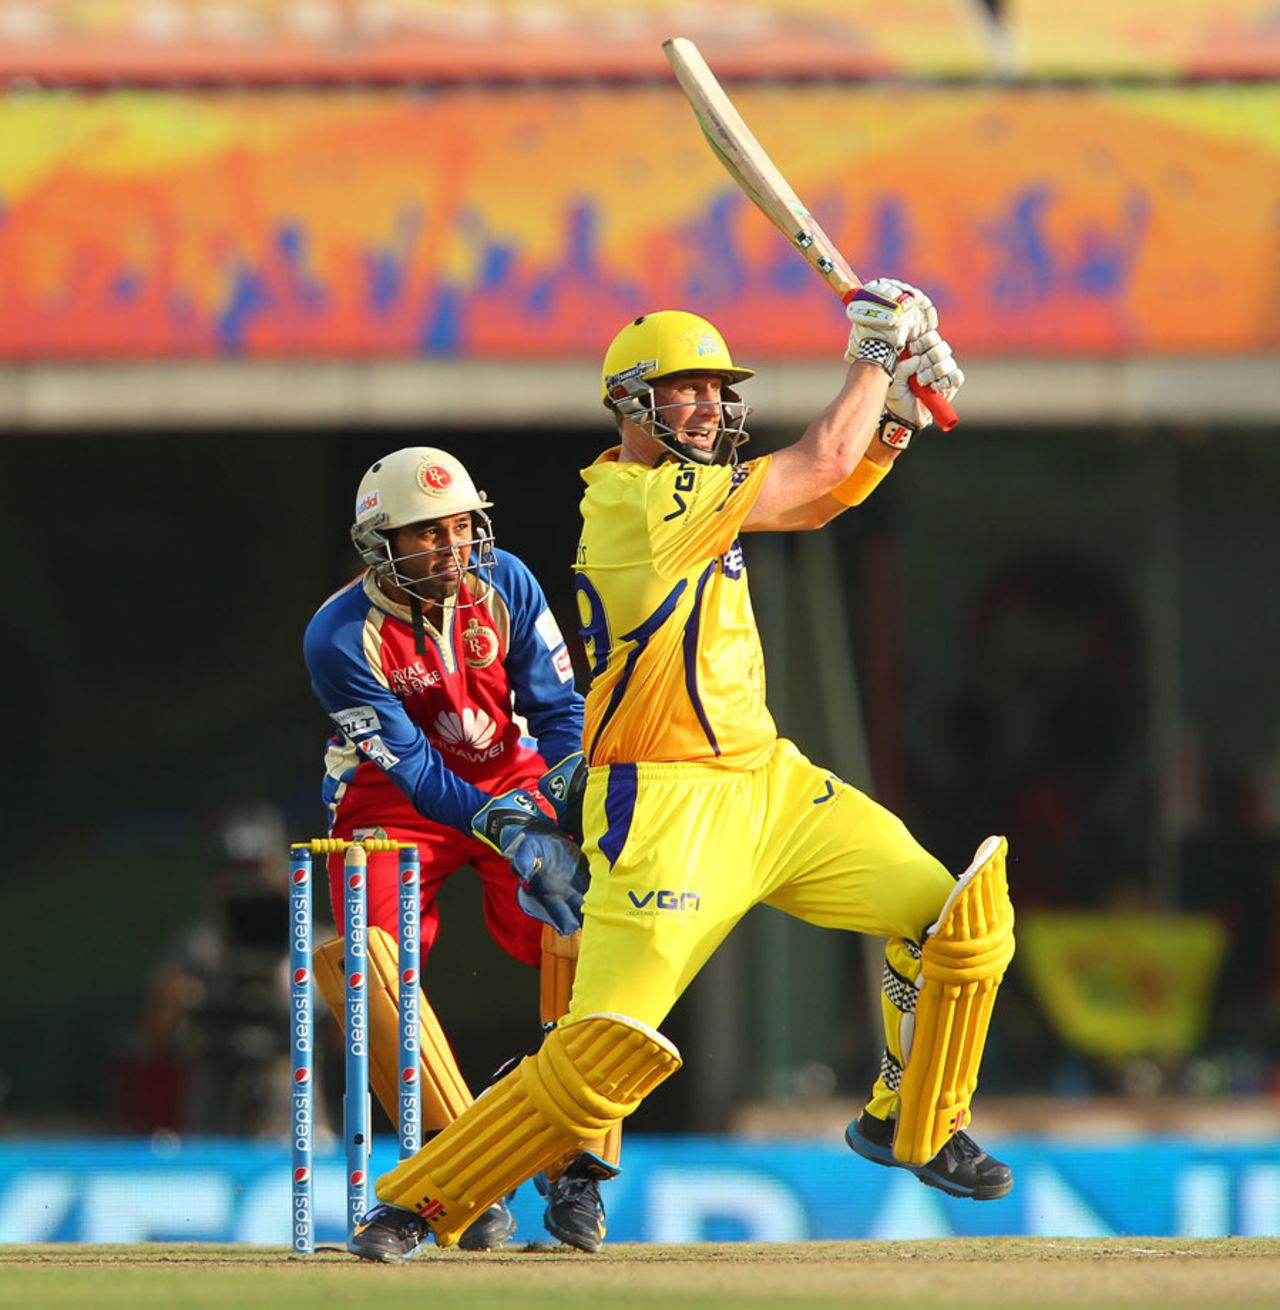 David Hussey made his first appearance for the Super Kings, Chennai Super Kings v Royal Challengers  Bangalore, IPL 2014, Ranchi, May 18, 2014